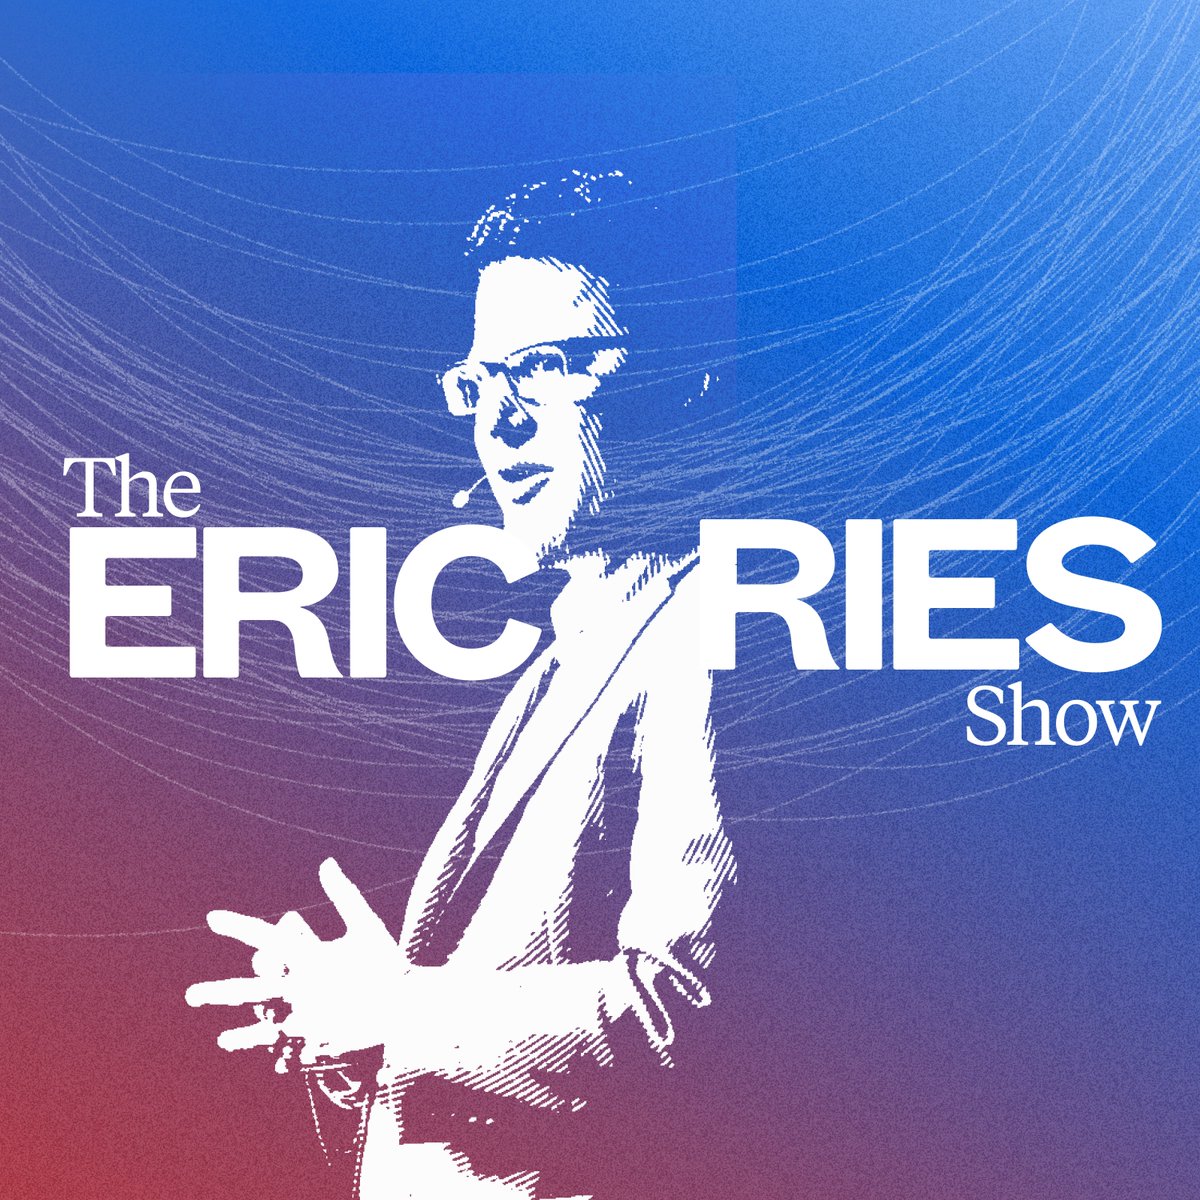 I'm thrilled to share this trailer to launch my new podcast, The Eric Ries Show -- an ongoing series of conversations about company building for the future we all deserve. I've had an incredible time already talking to founders, executives, deep thinkers and others about how